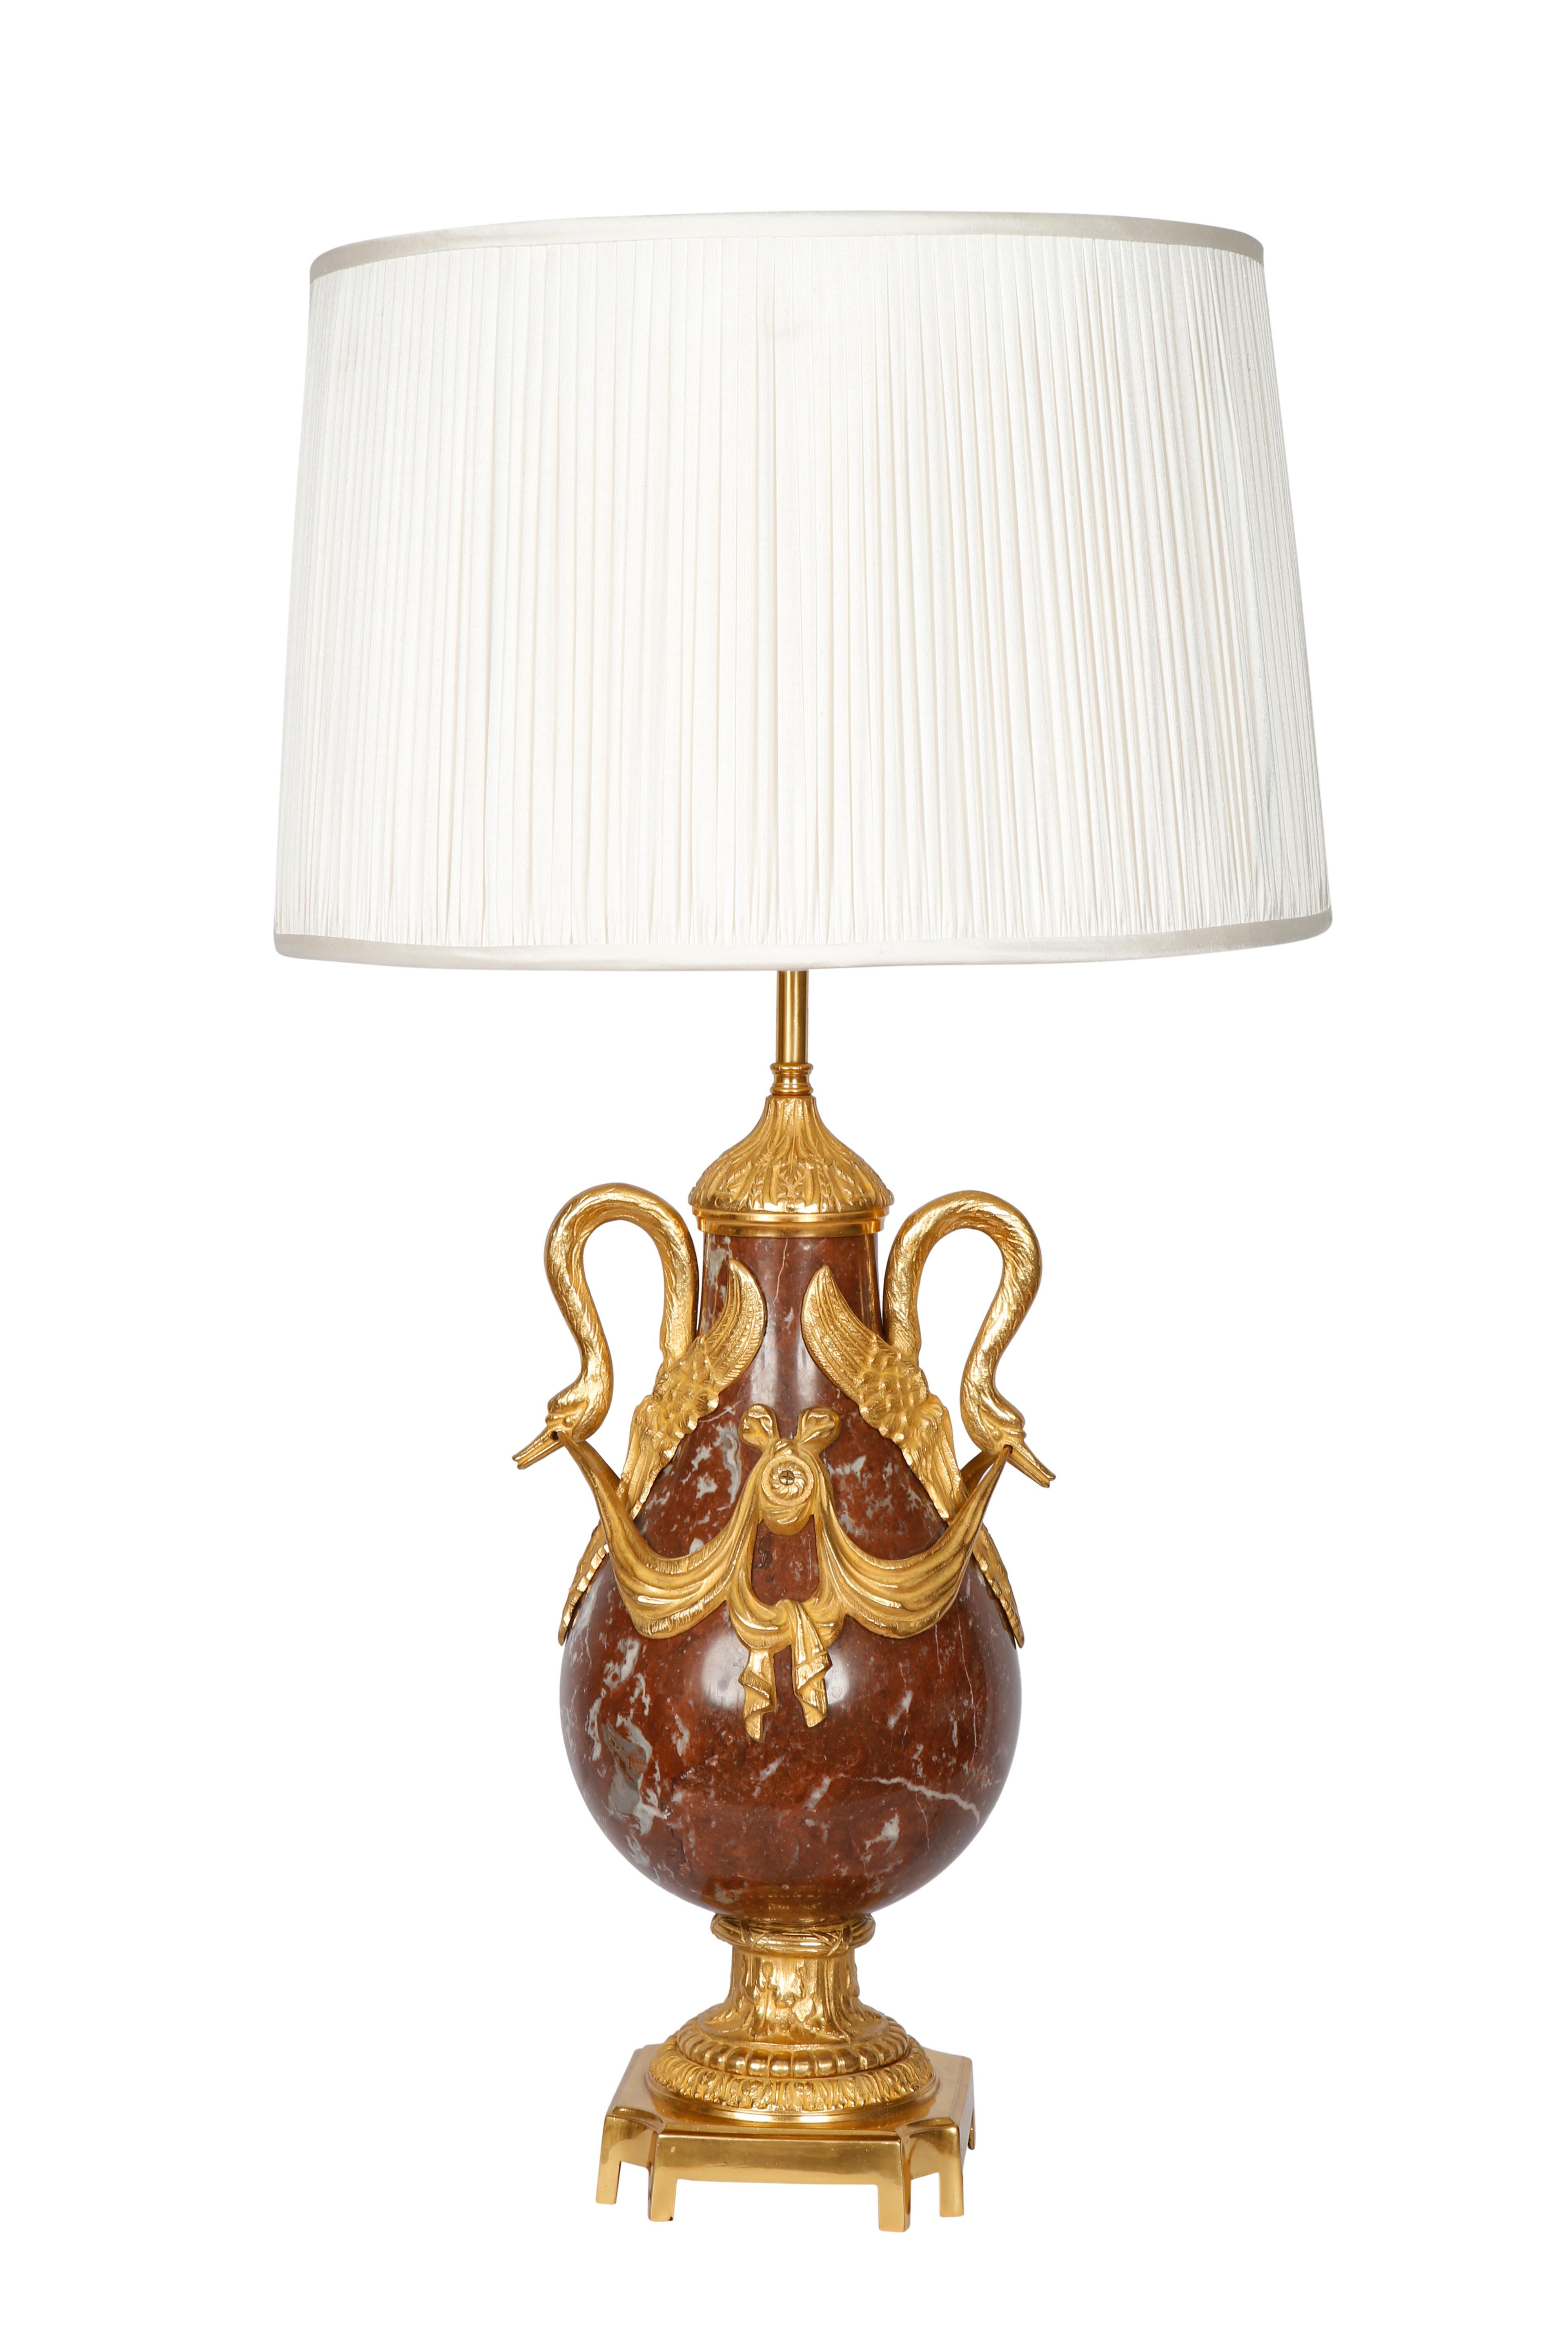 Crafted in France circa 1880, each cassolette is made of carved red marble and has a bronze base and decorative bronze mounts. The cassolettes have been converted into table lamps and both have custom pleated white shades. The lamps are in excellent